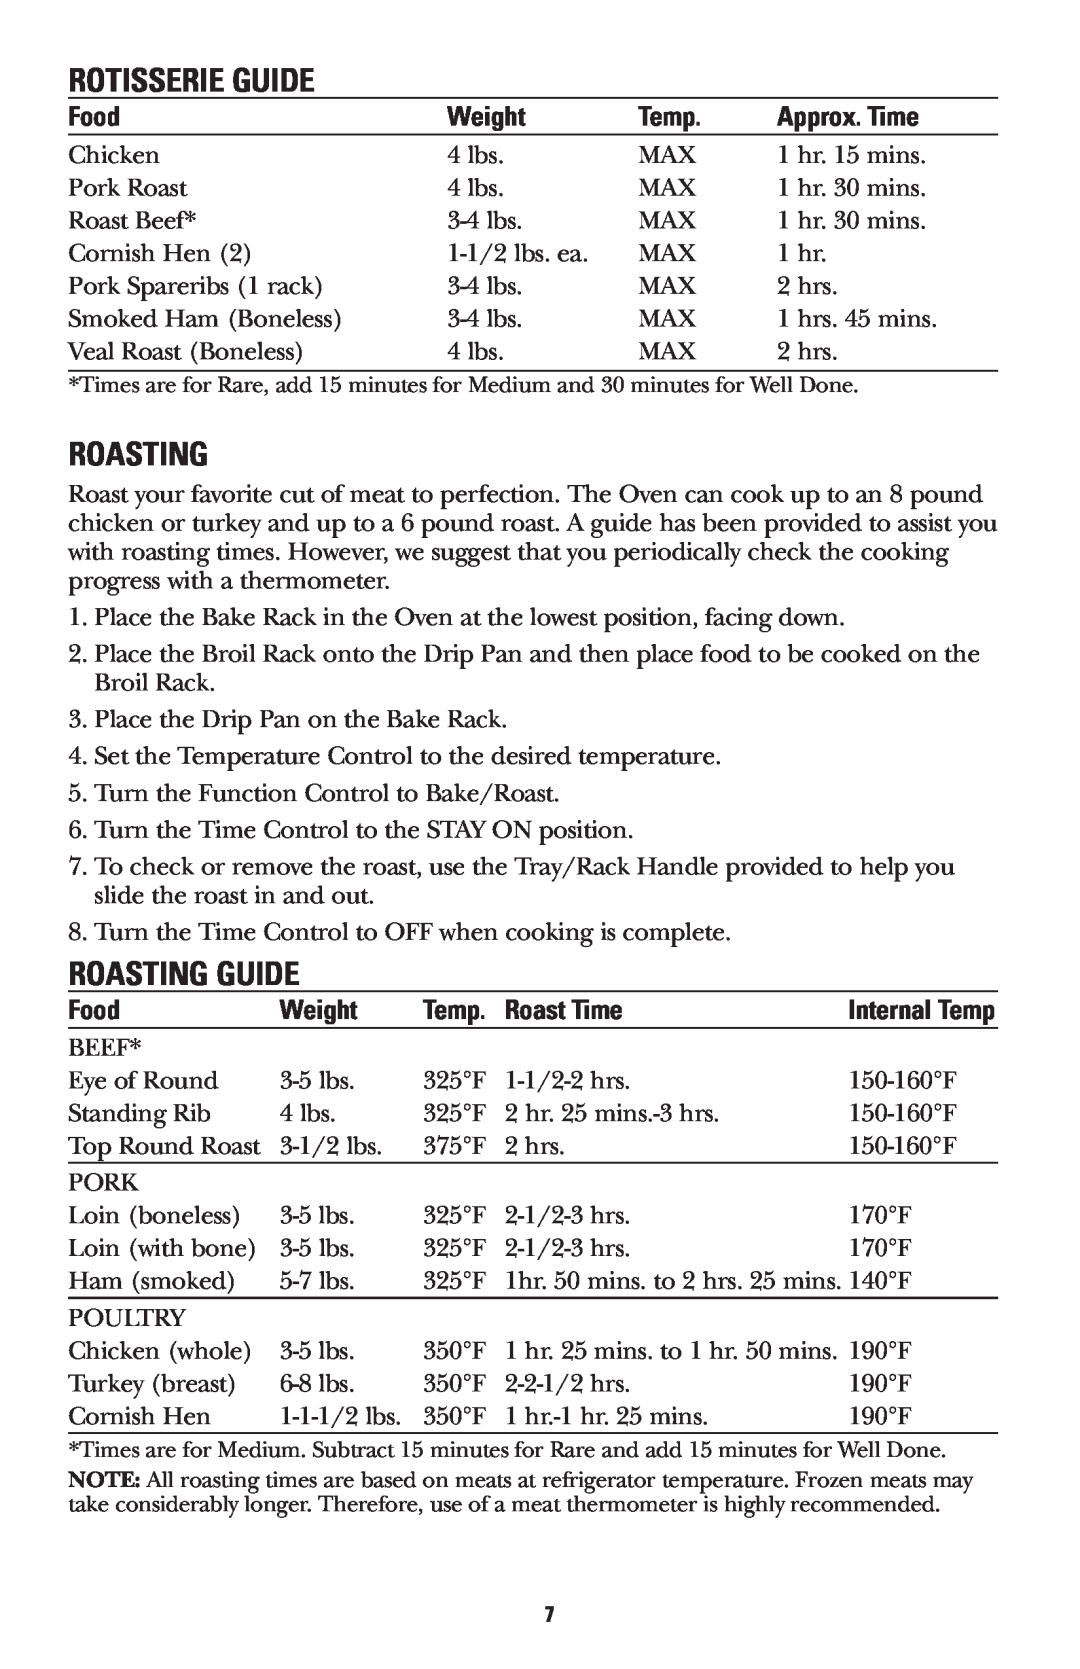 GE 168947 manual Rotisserie Guide, Roasting Guide, Food, Weight, Temp, Approx. Time, Roast Time 